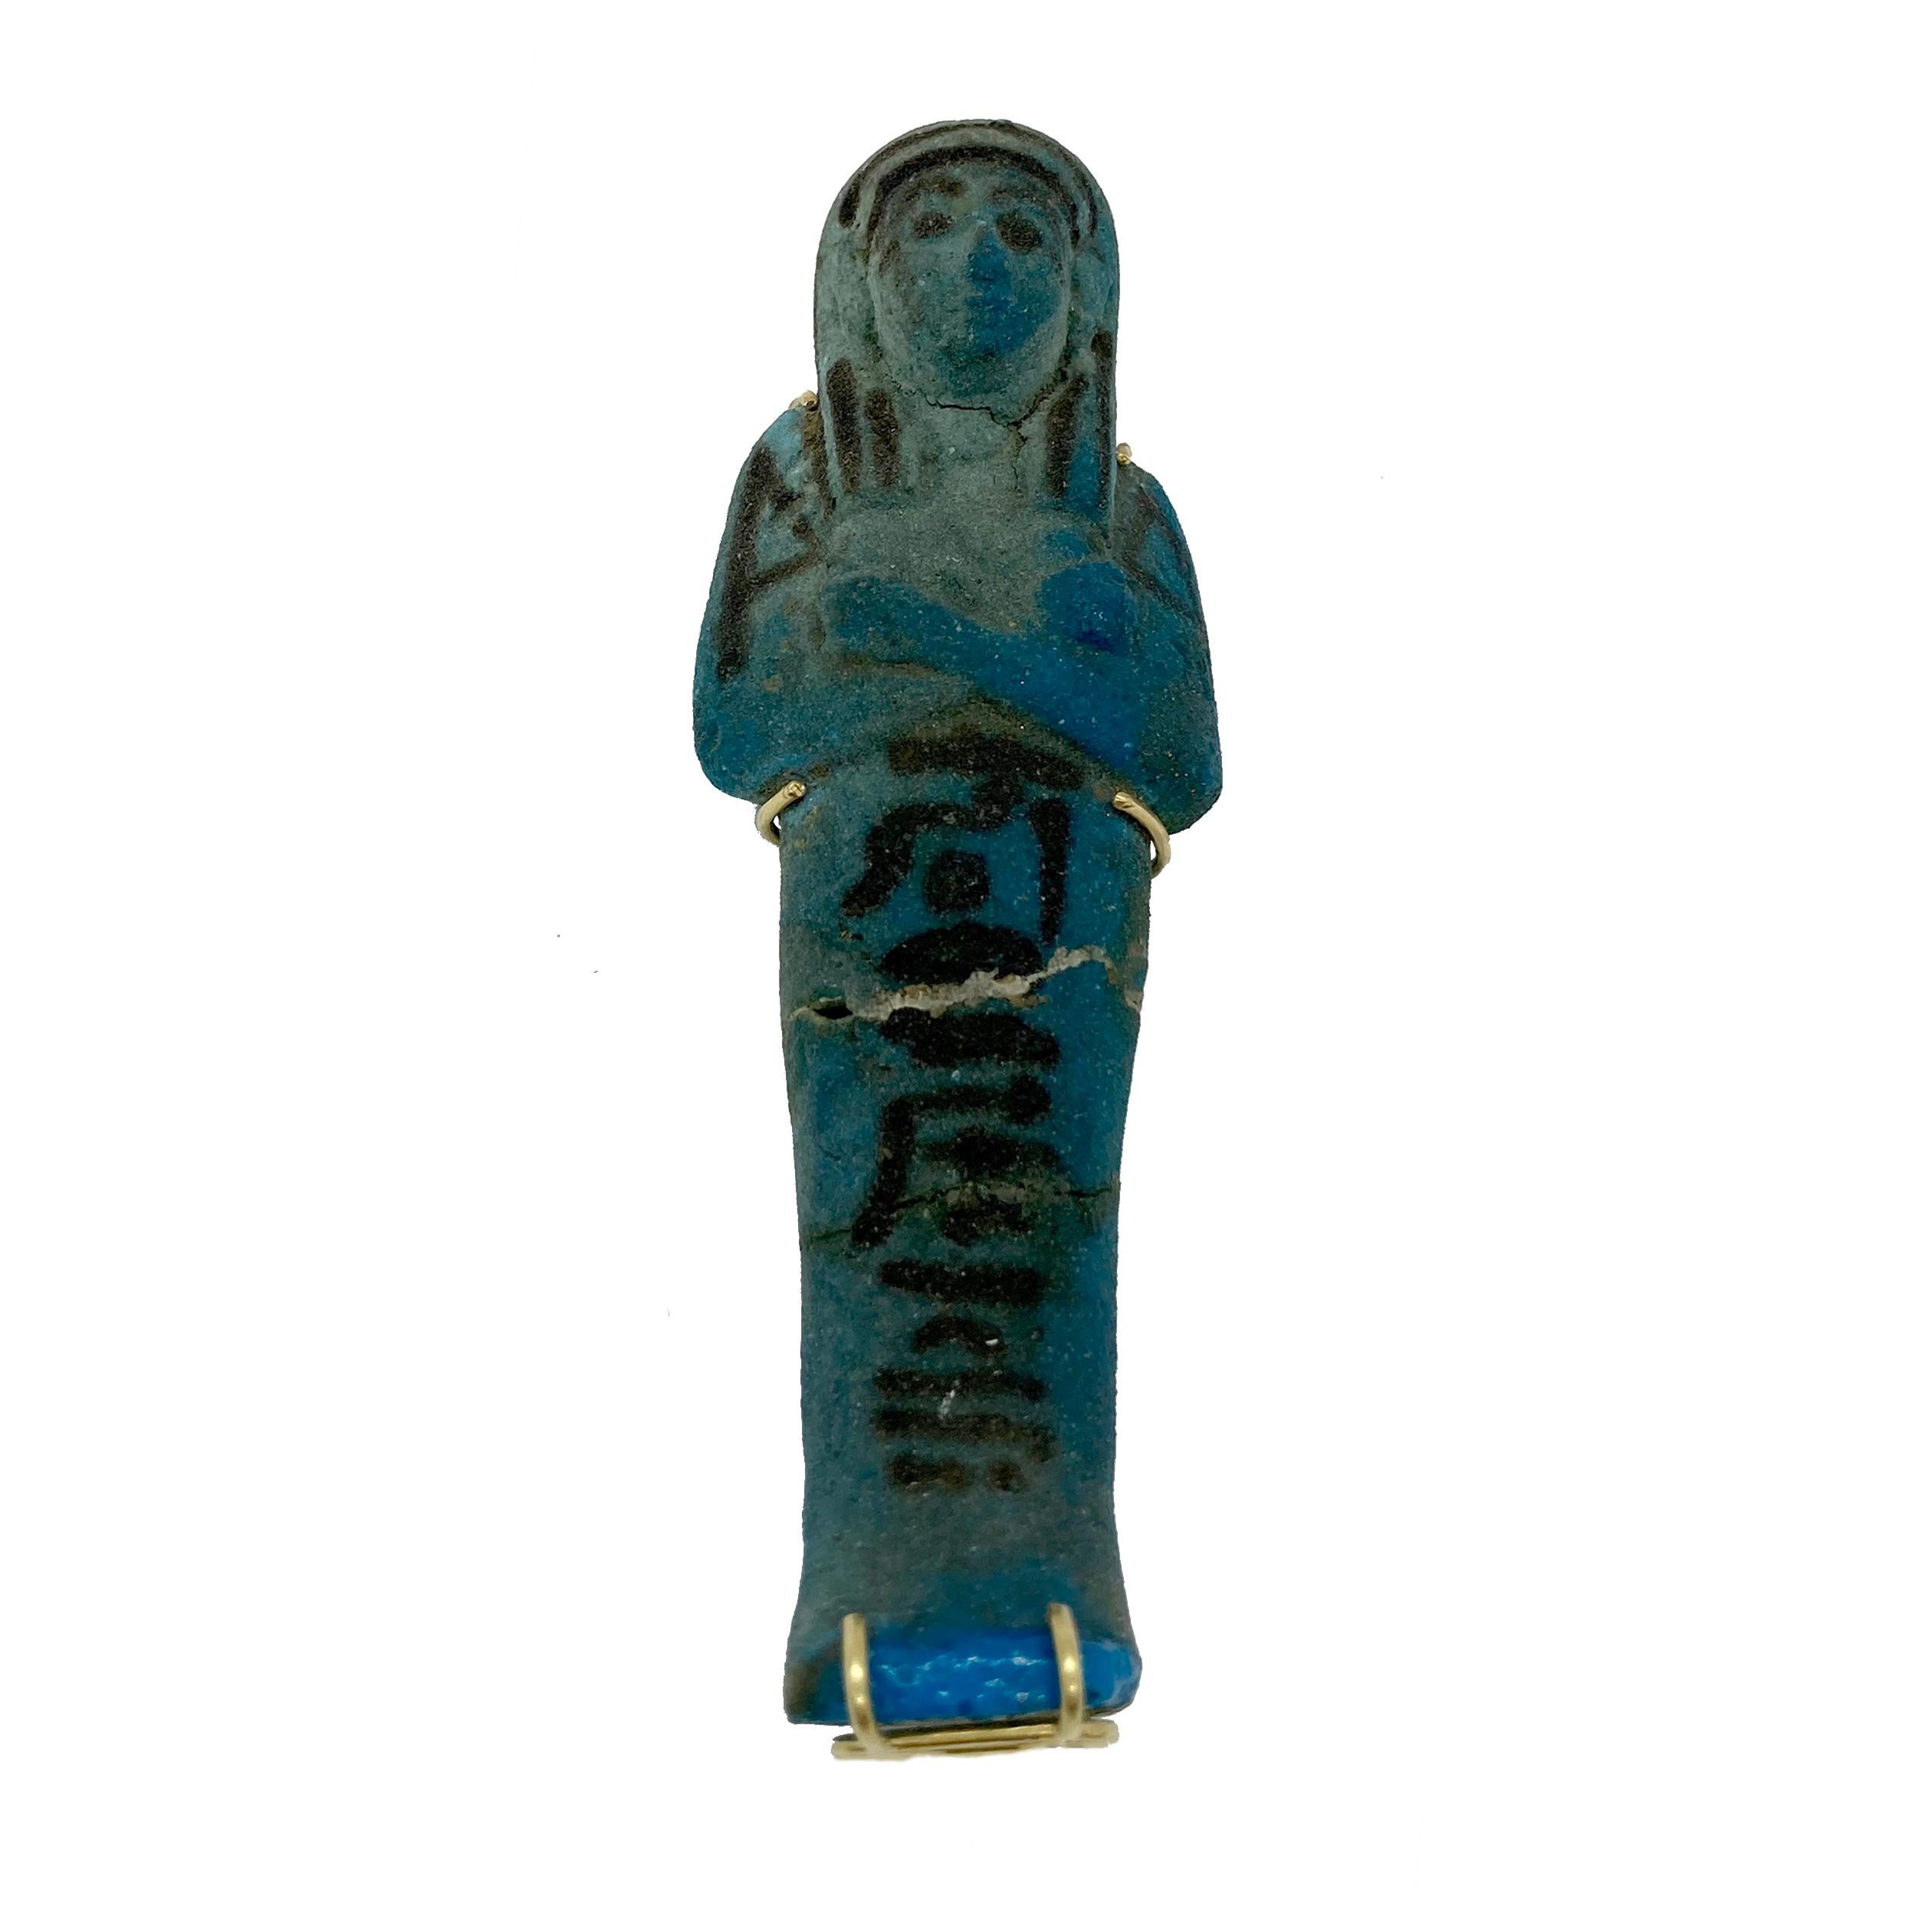 An Ancient Egyptian funerary figurine made of faience in a modern gold pendant mounting.